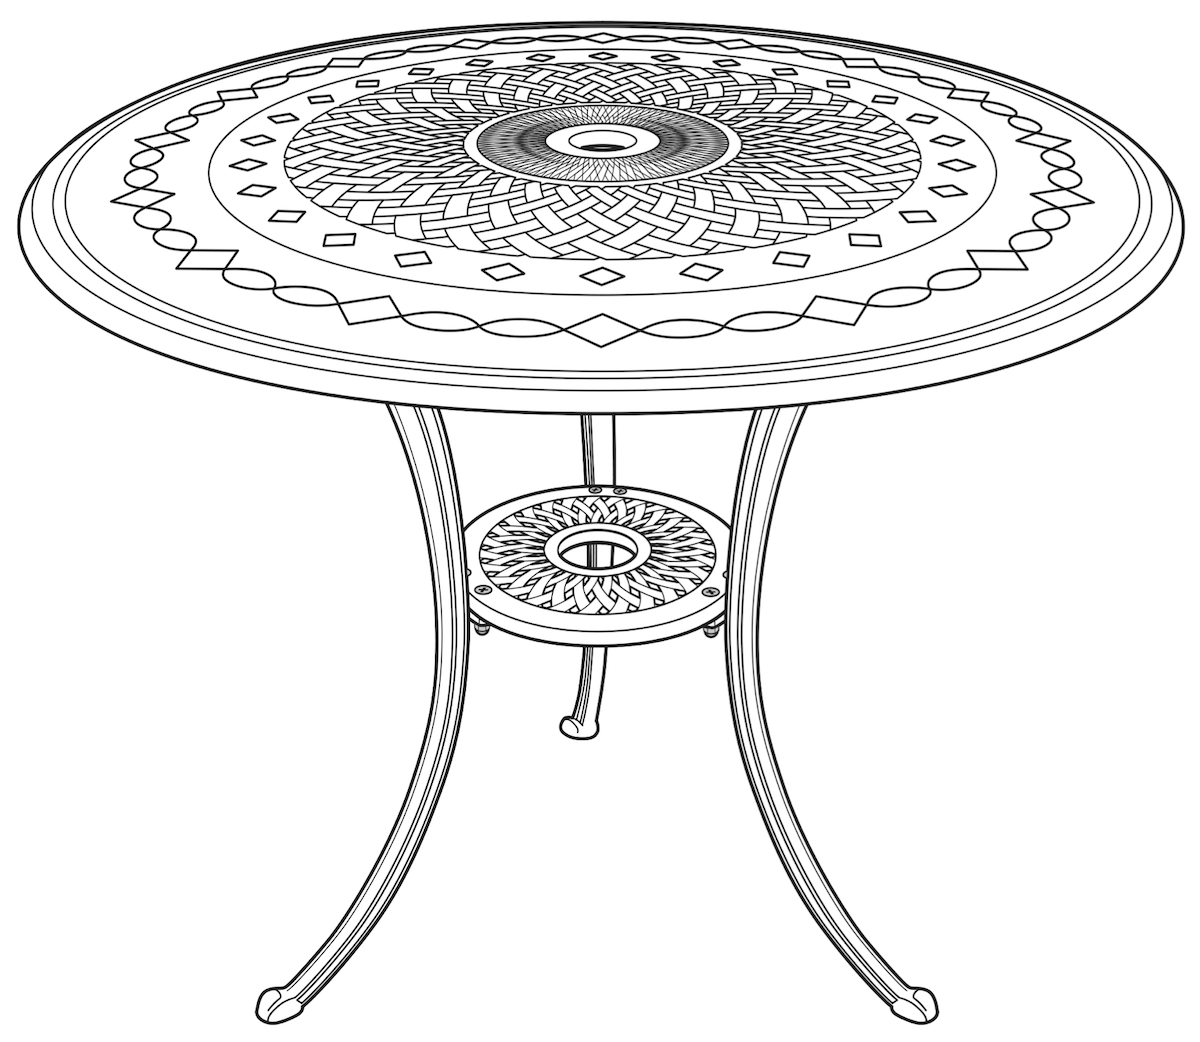 How to assemble our Anna Garden Bistro Table